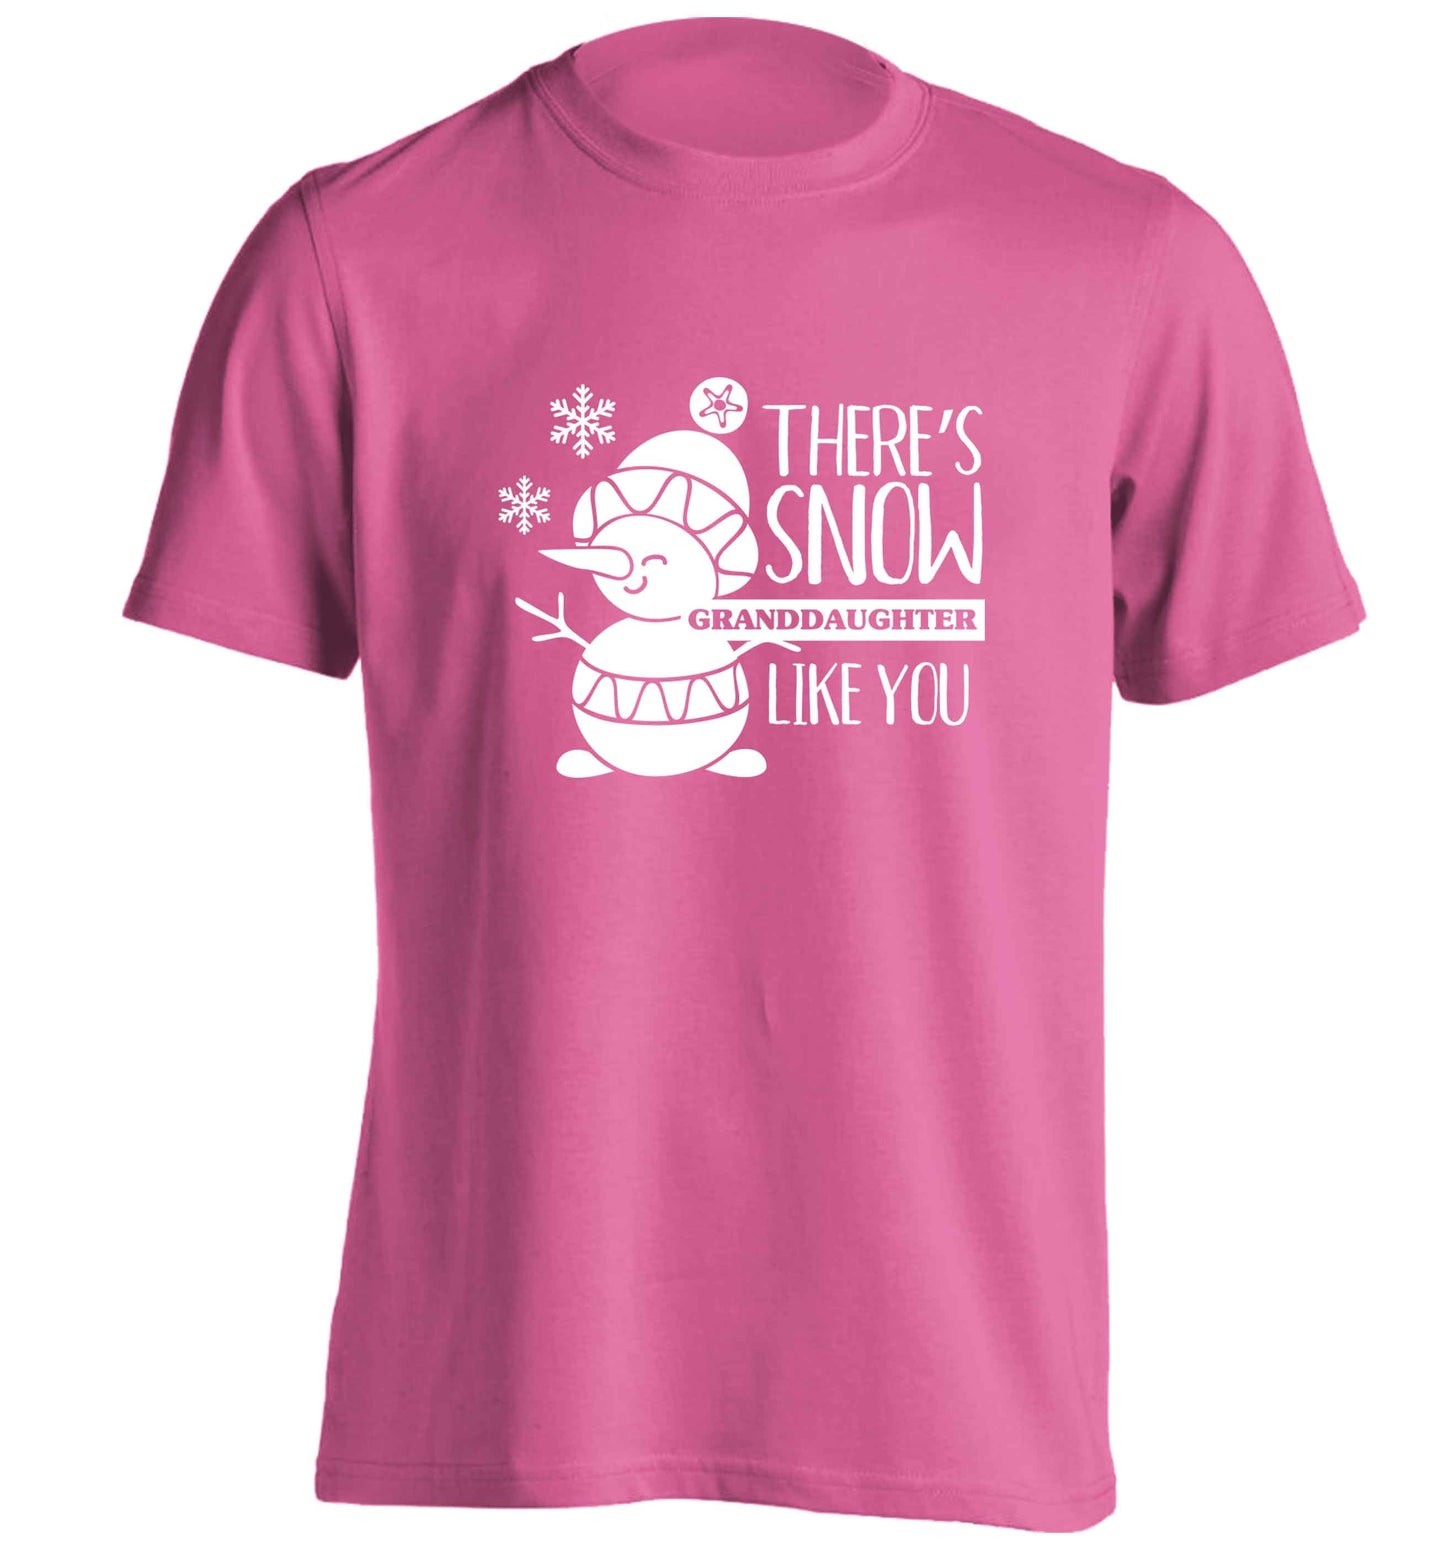 There's snow granddaughter like you adults unisex pink Tshirt 2XL